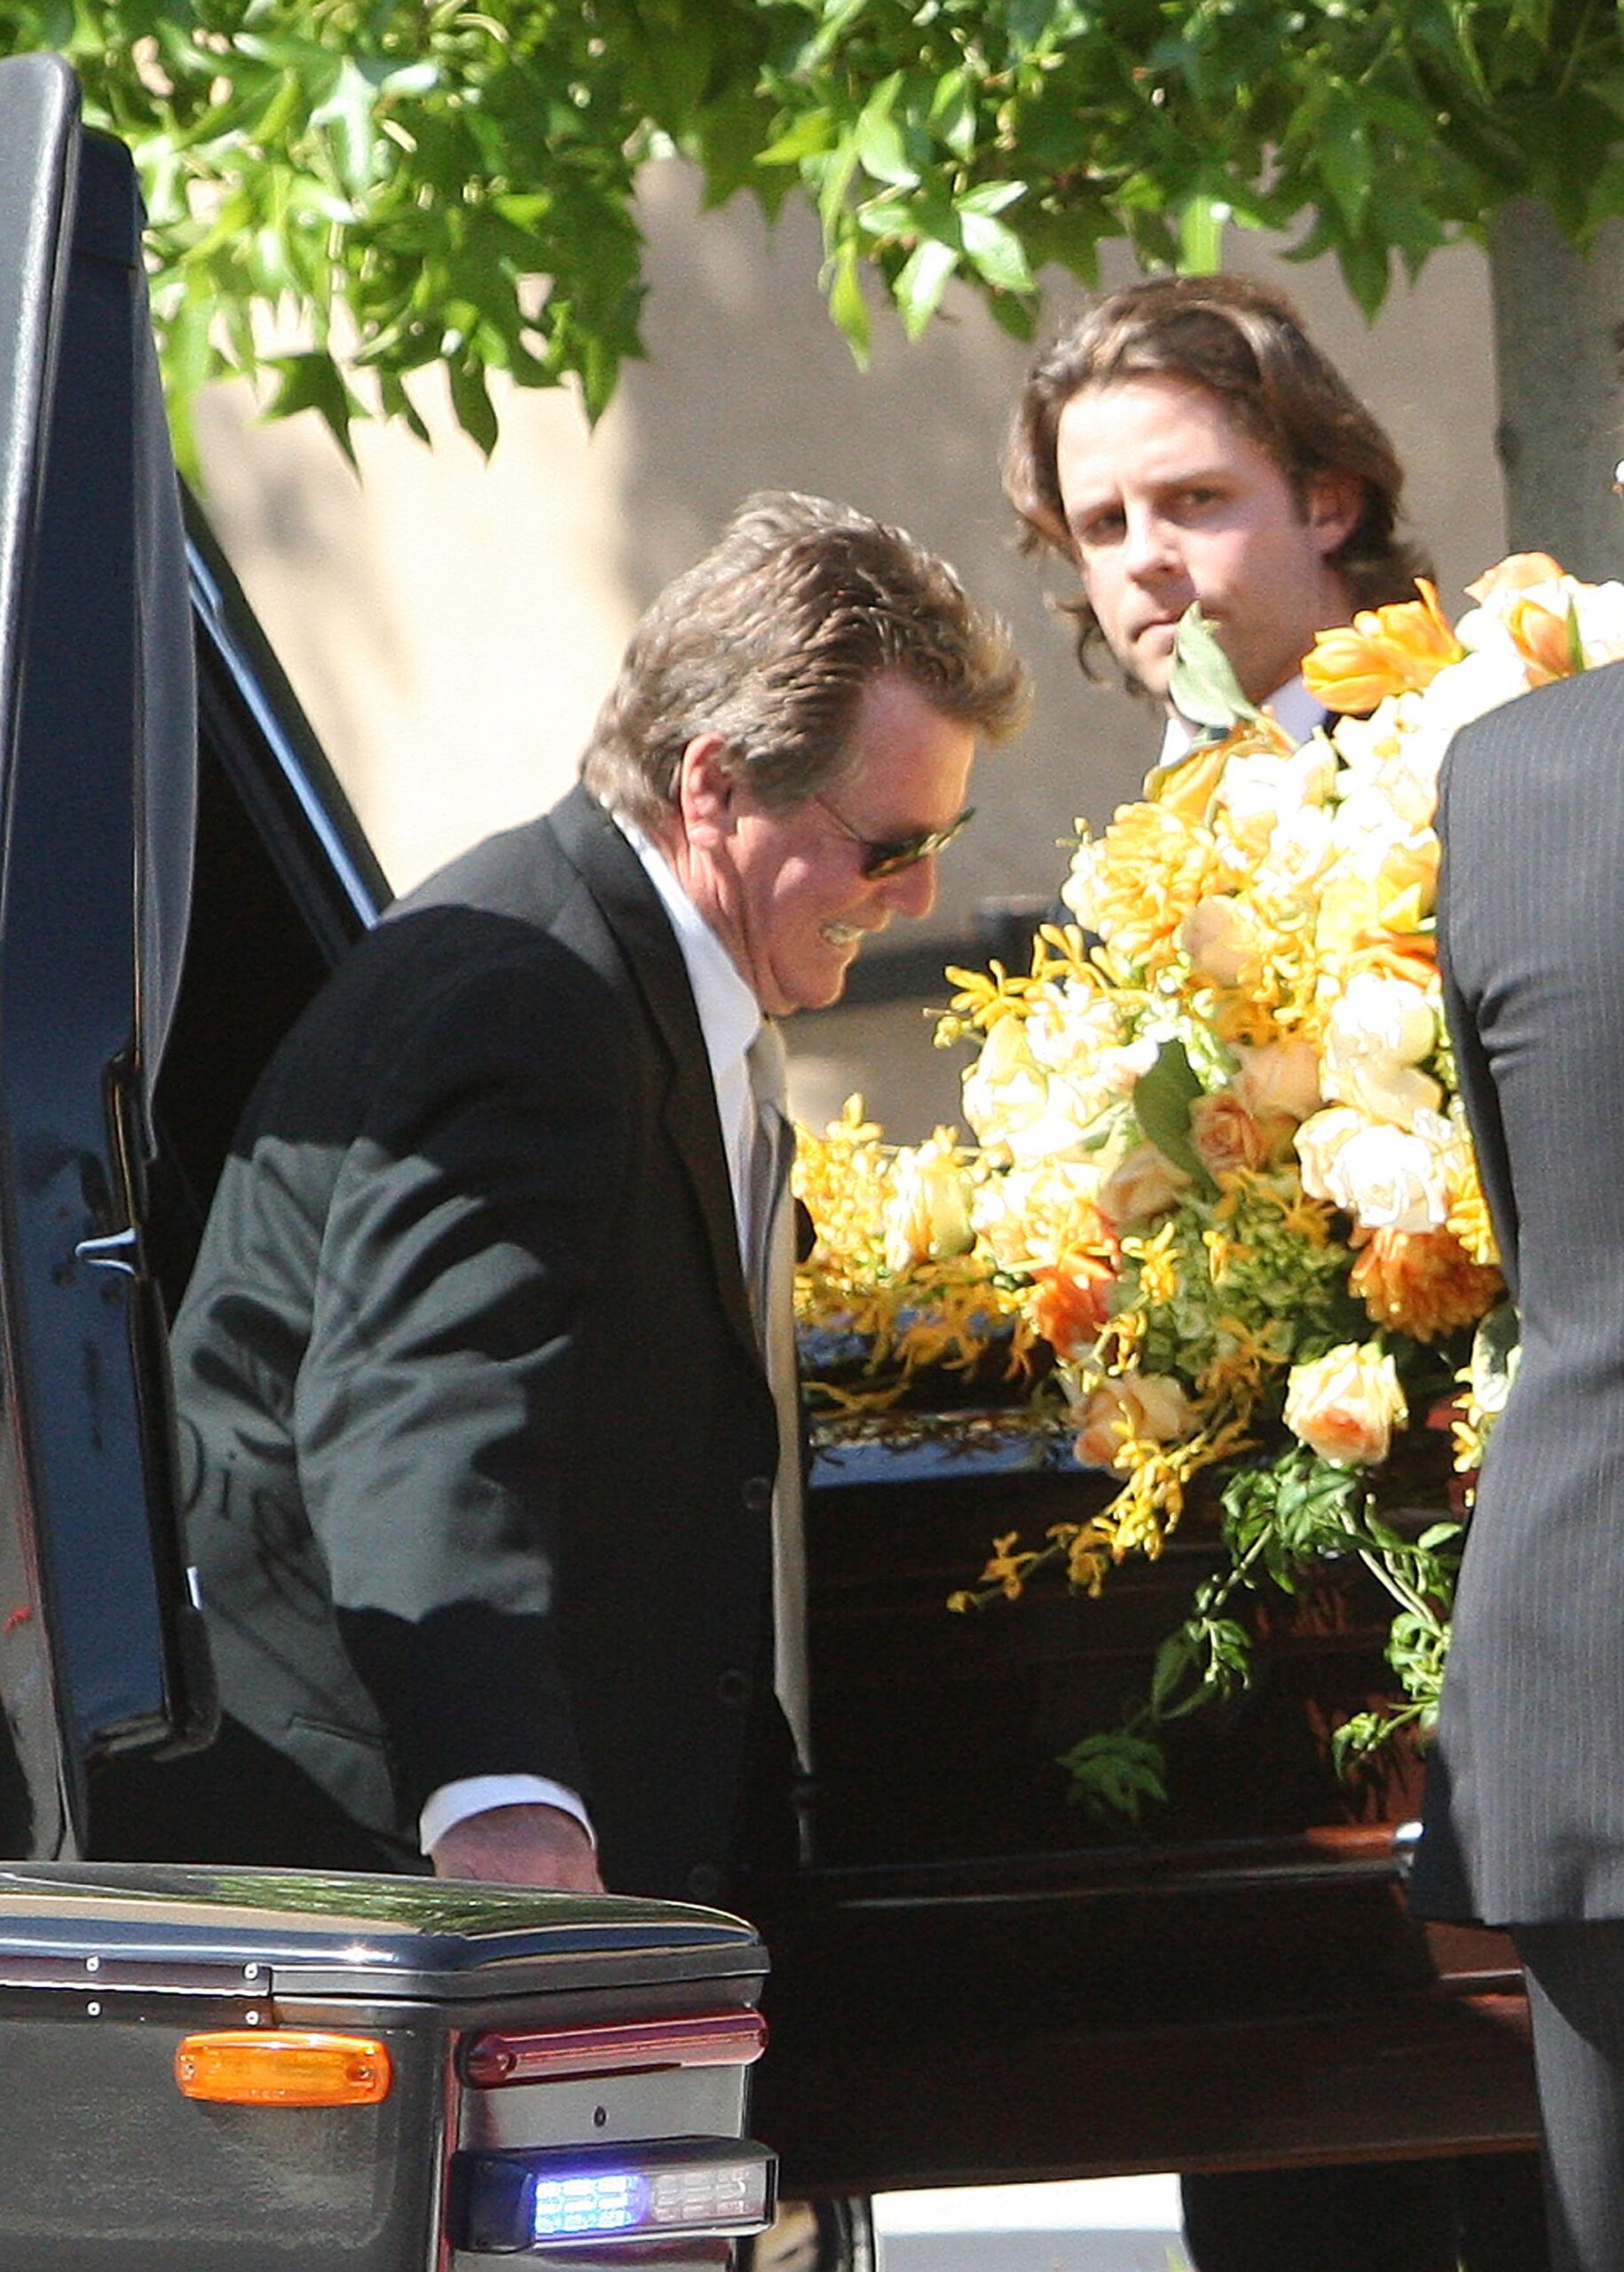 Ryan O'Neal attends Farrah Fawcett's funeral service at the Cathedral of Our Lady of the Angels on June 30, 2009, in Los Angeles, California. | Source: Getty Images